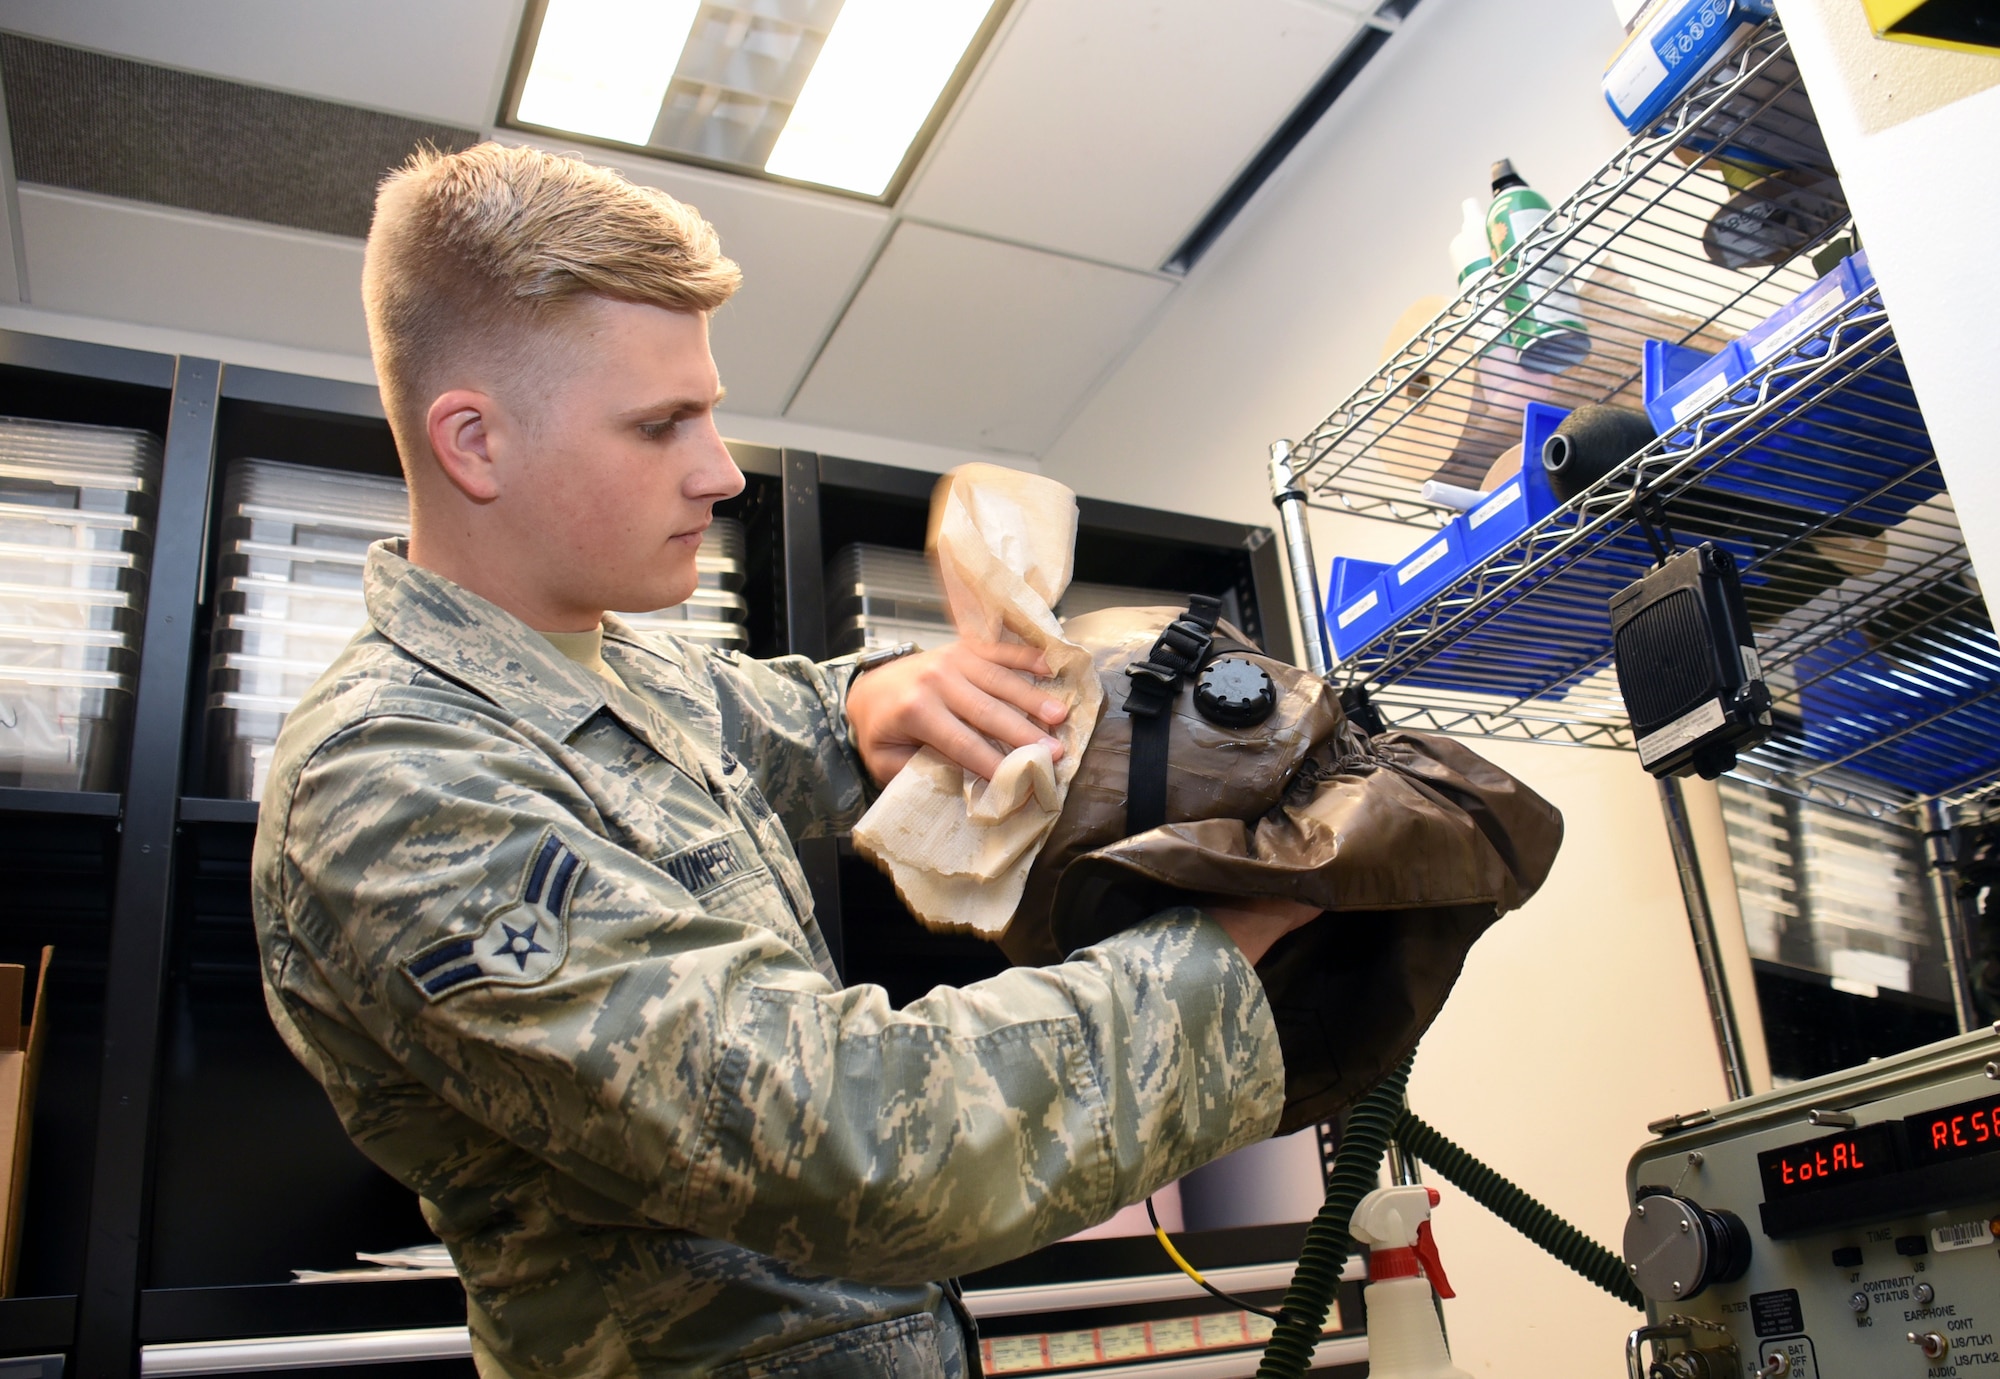 U.S. Air Force Airman 1st Class Joshua Humpert, 437th Operations Support Squadron Aircrew Flight Equipment technician, inspects aircrew flight equipment July 9, 2019, at Travis Air Force Base, California. Humpert accepted a temporary duty at Travis in order to experience the AFE mission through the lens of another base outside his home station of Joint Base Charleston, South Carolina. (U.S. Air Force photo by Senior Airman Christian Conrad)